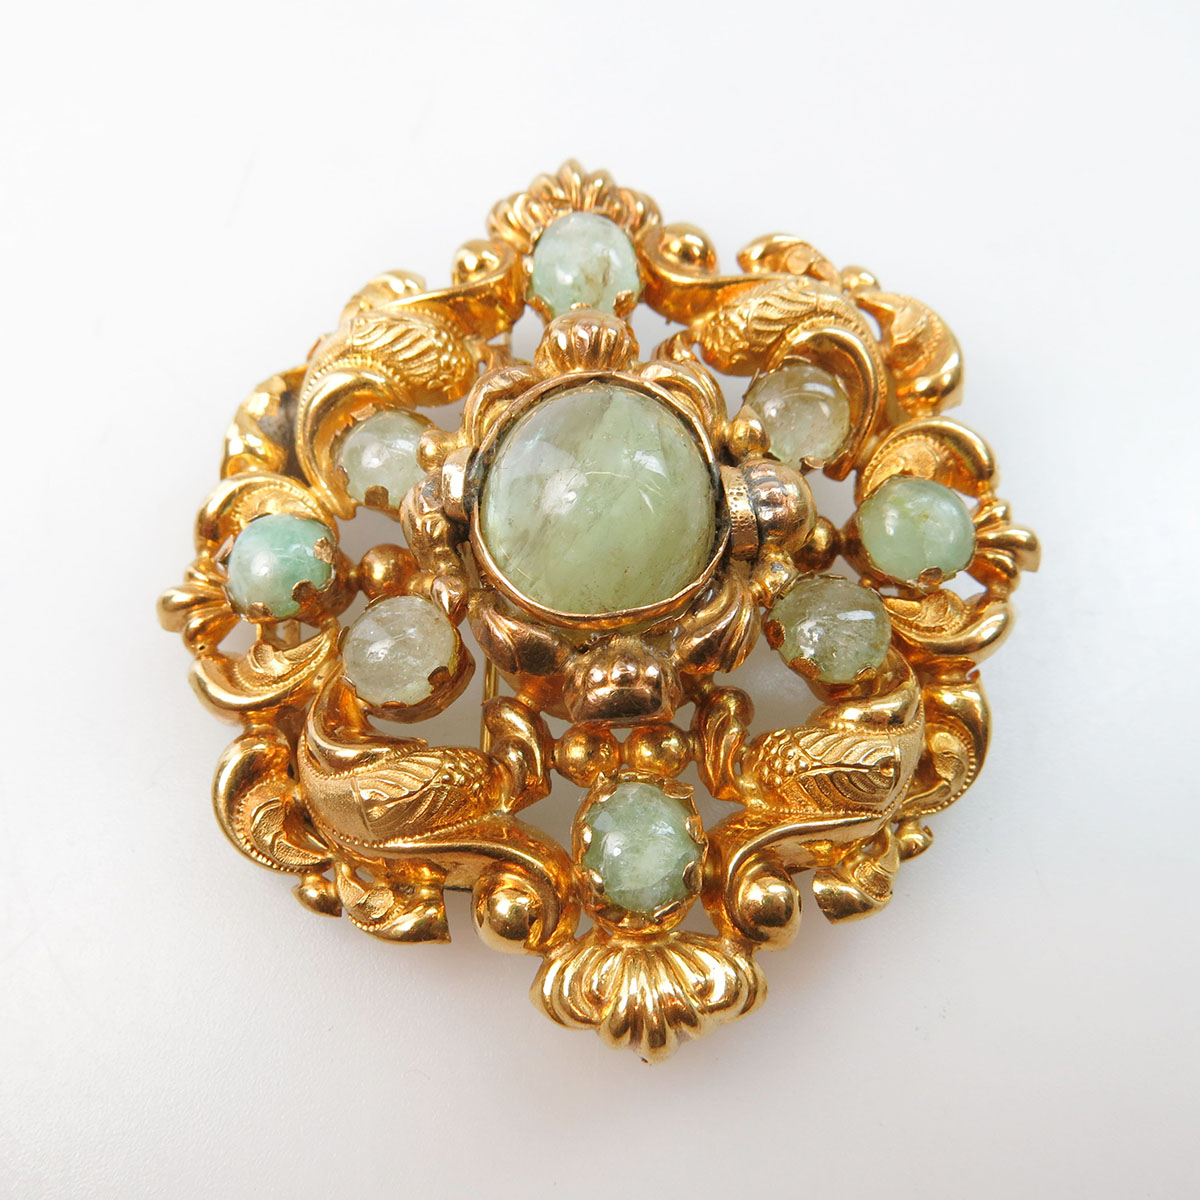 19th Century French 18k Yellow Gold Brooch